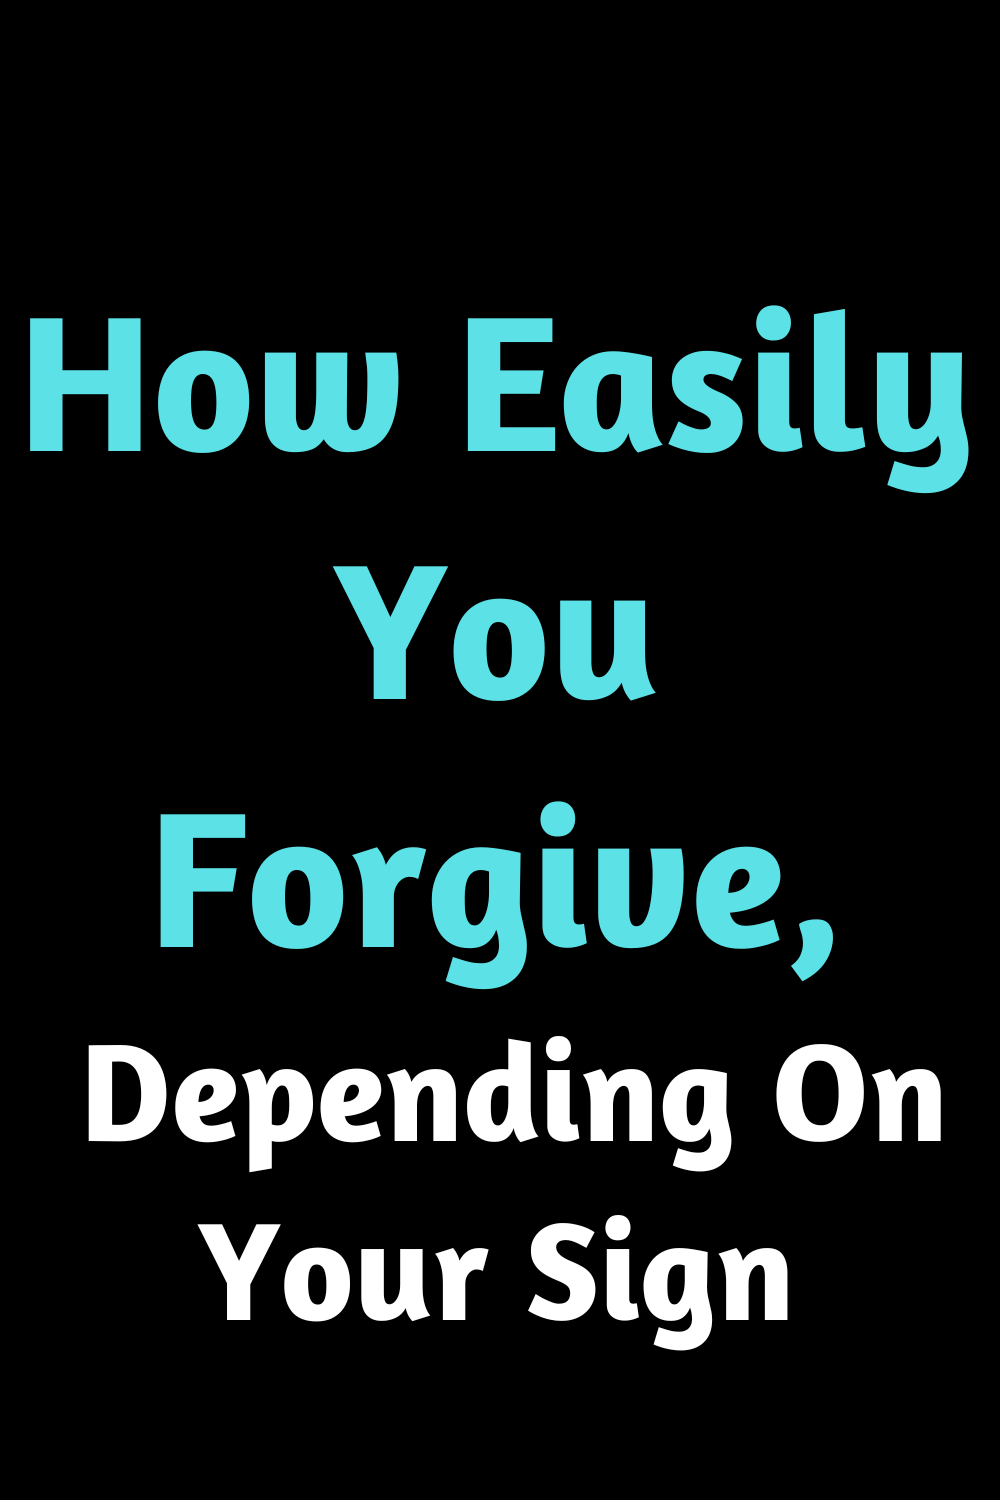 How Easily You Forgive, Depending On Your Sign